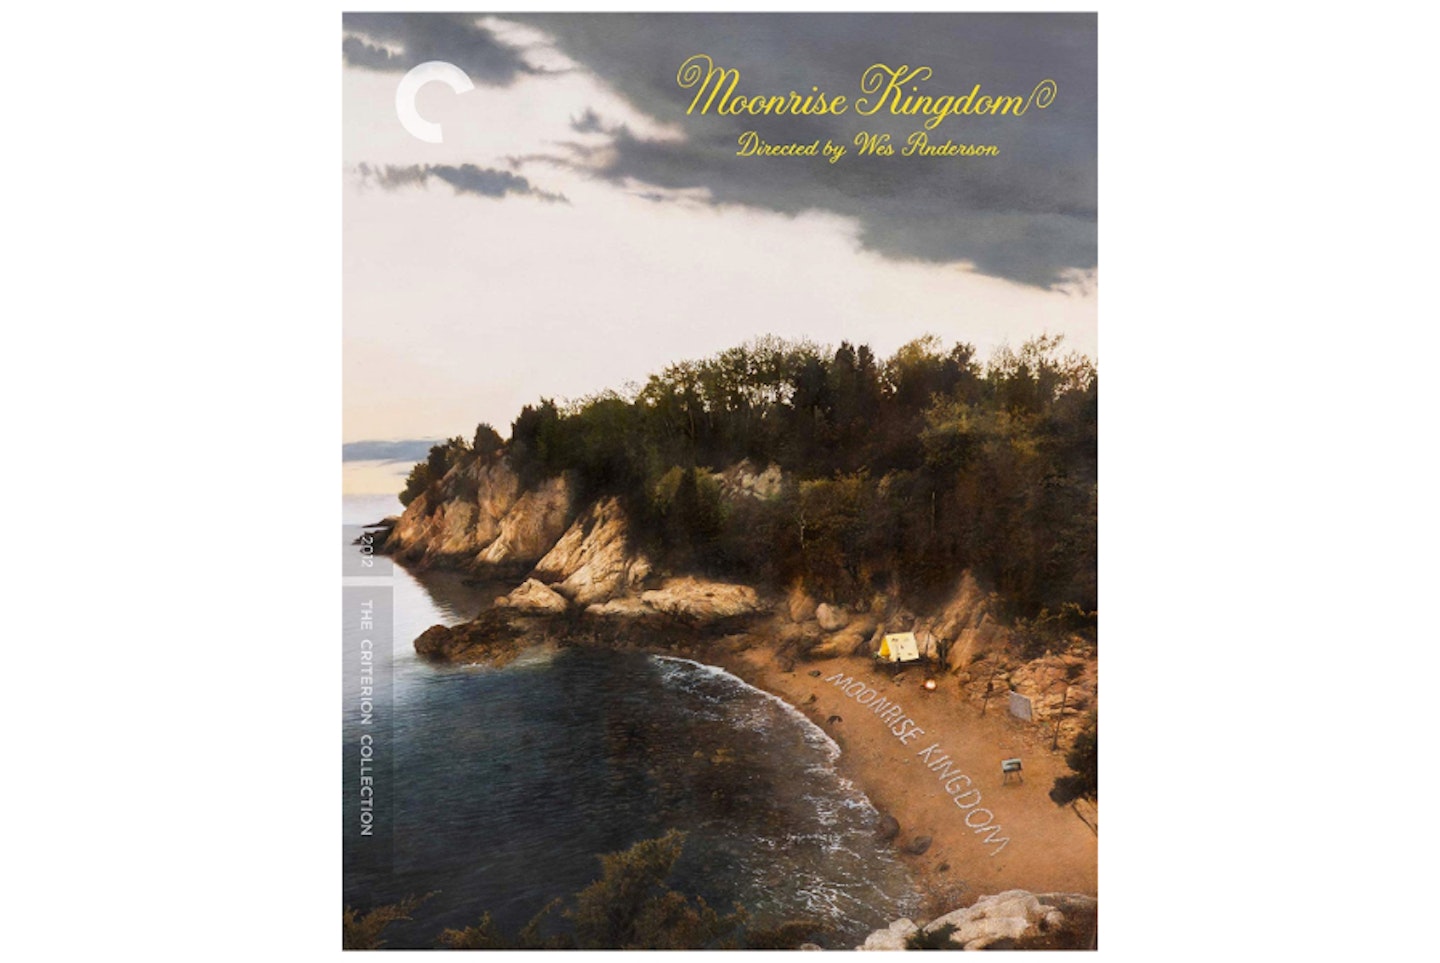 Moonrise Kingdom – The Criterion Collection, £25.99